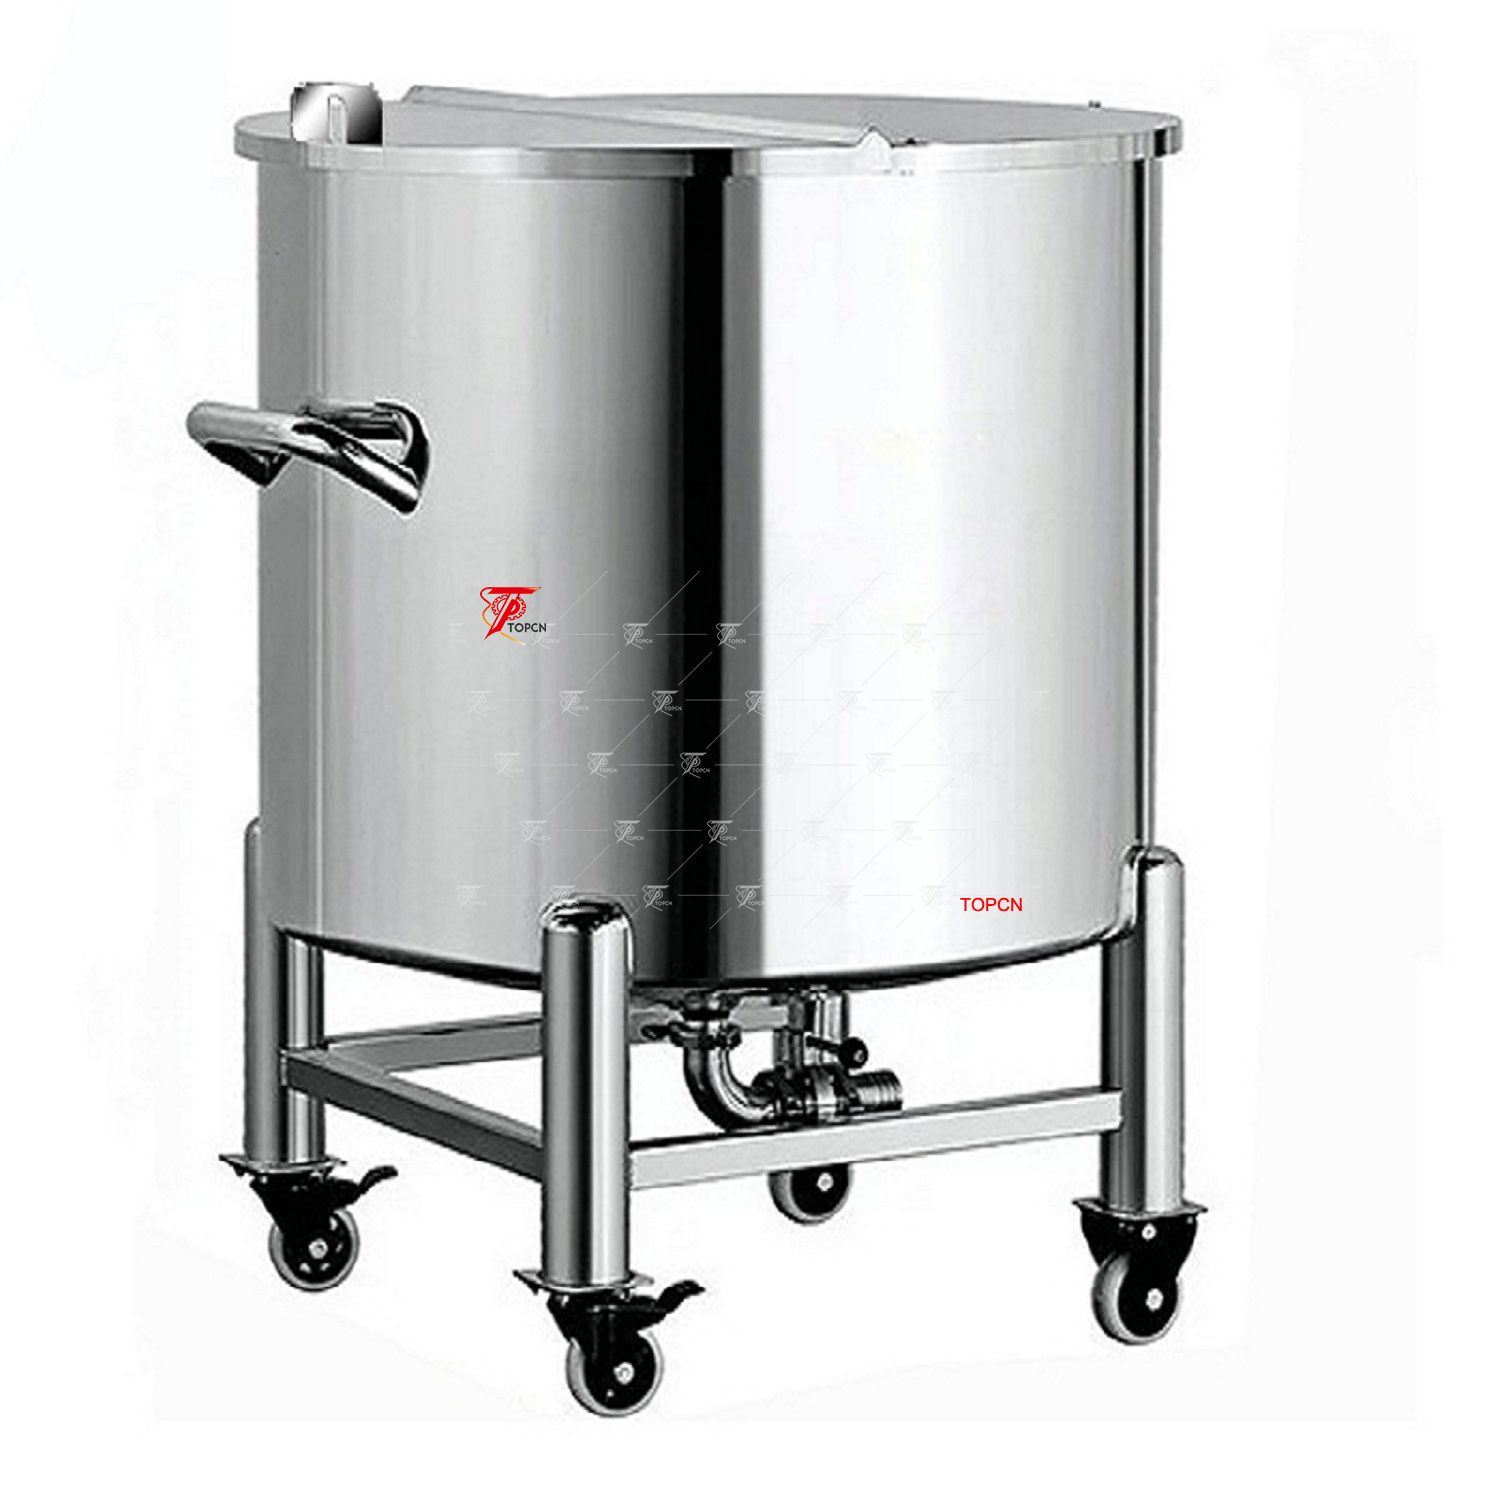 Single-layer Stainless Steel Tank, Top Open Water Storage Tank, Fixed Single Layer Stainless Steel Container